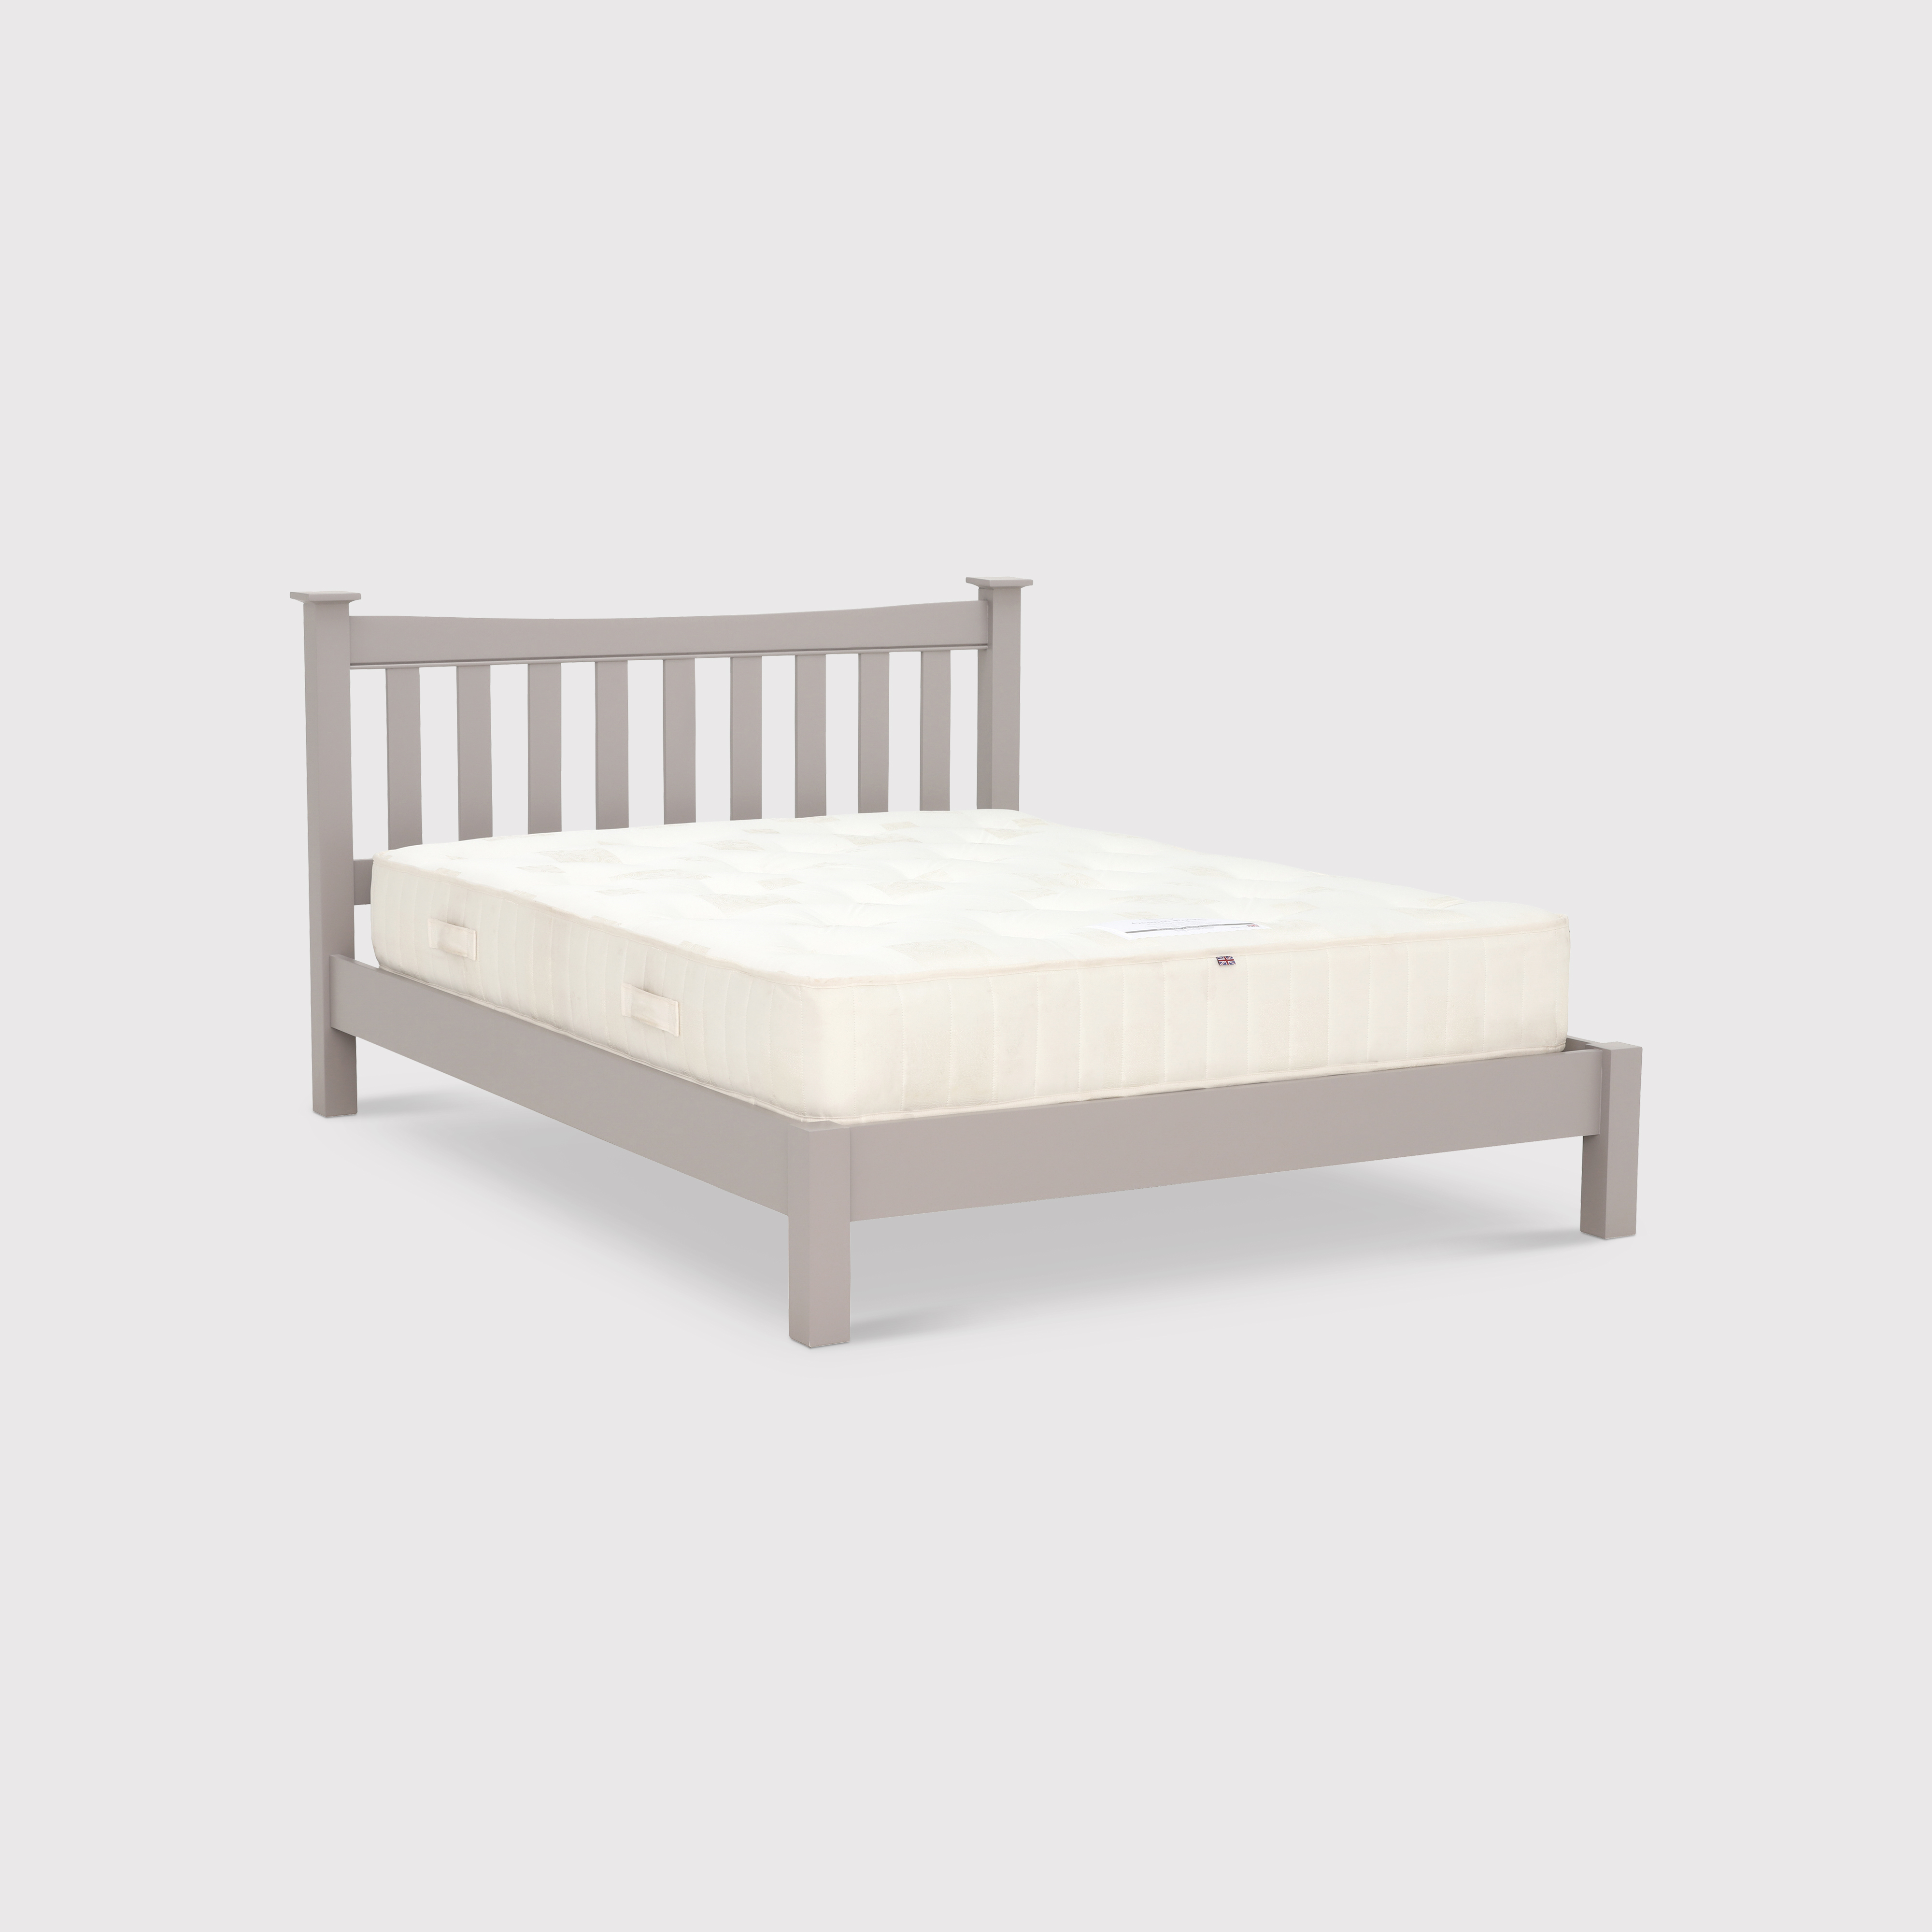 Photo of Helmsley 135cm bed frame in grey double